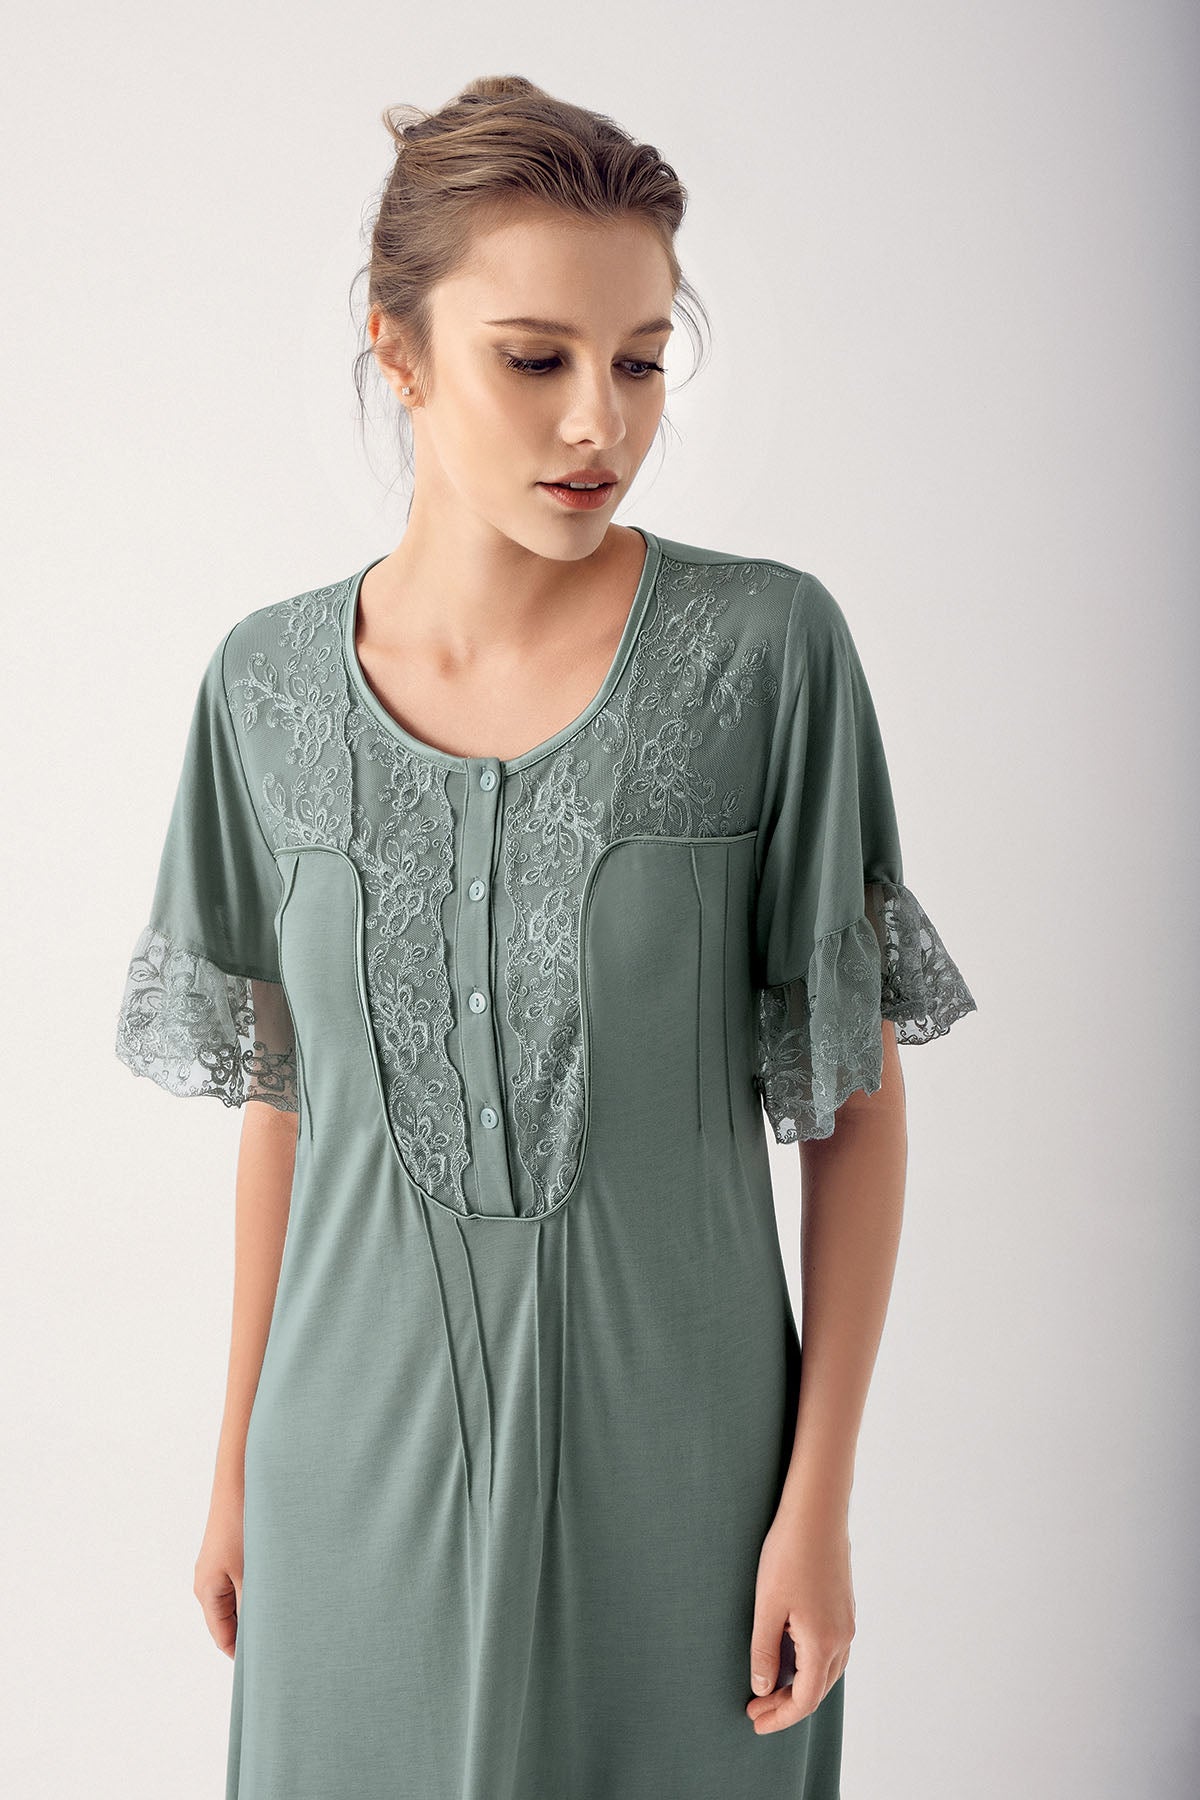 Shopymommy 14105 Collar And Sleeve Lace Maternity & Nursing Nightgown Green